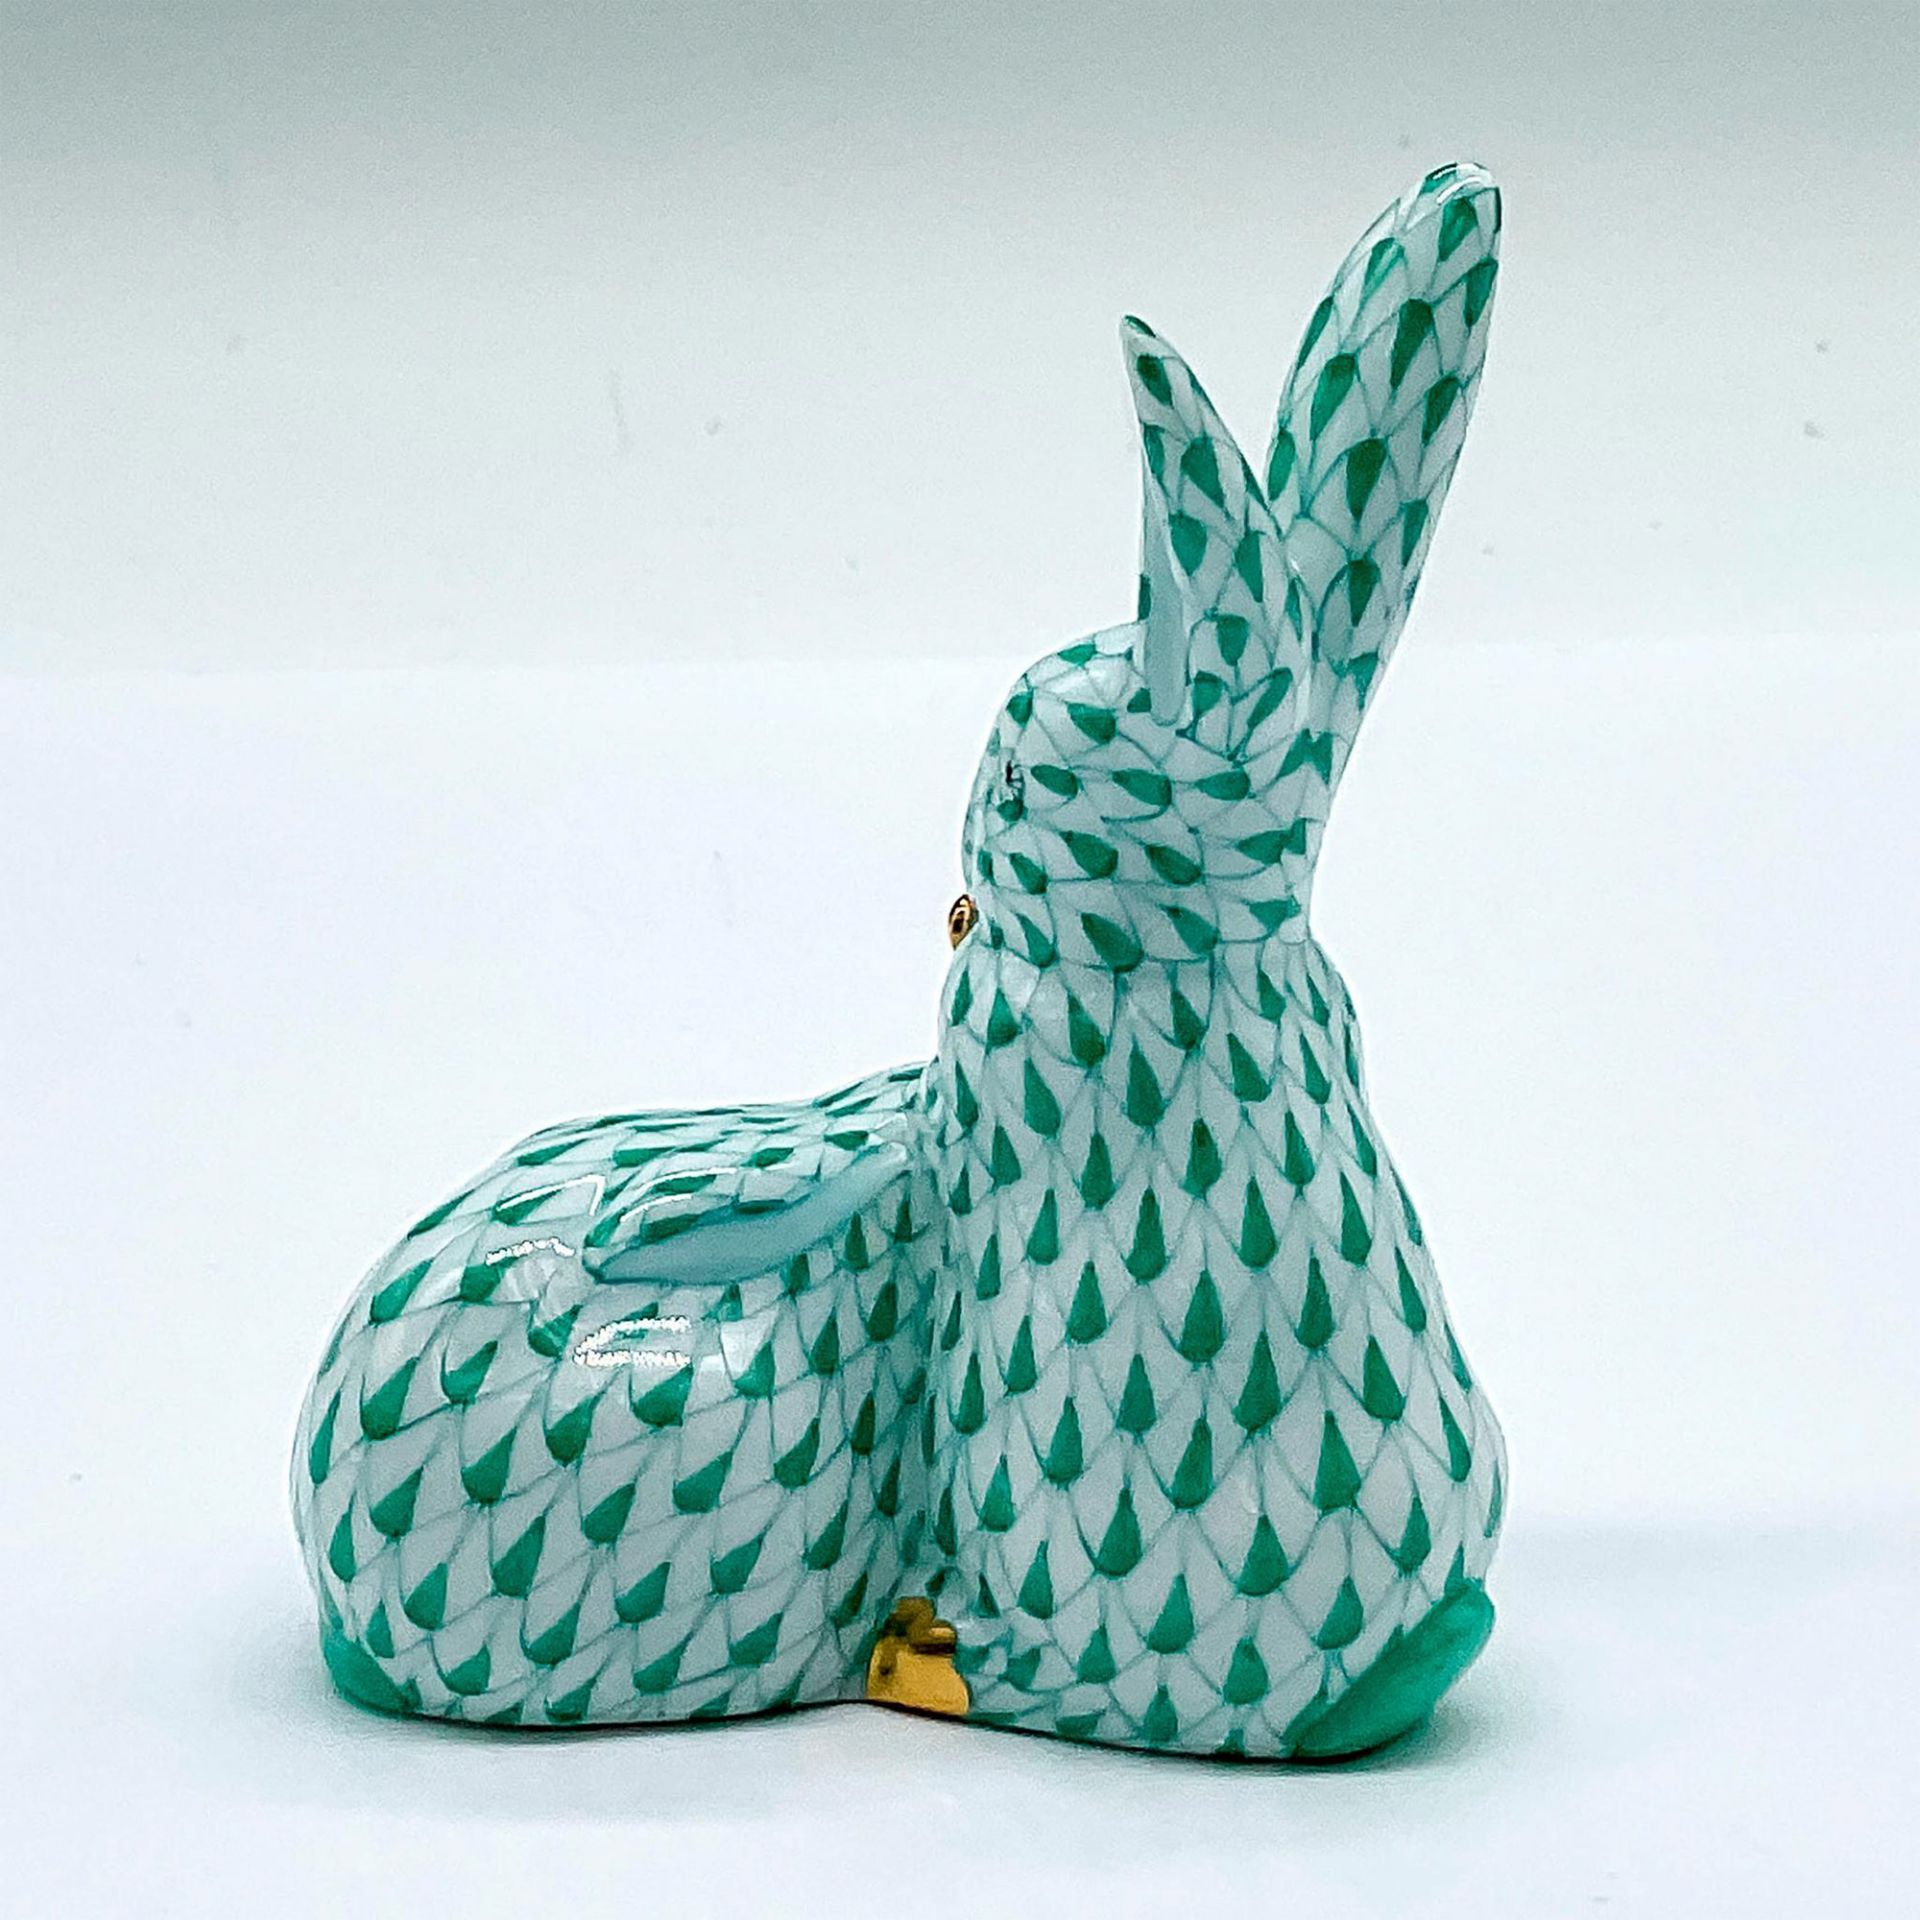 Herend Porcelain Green Figurine, Pair of Rabbits with Corn - Image 2 of 3